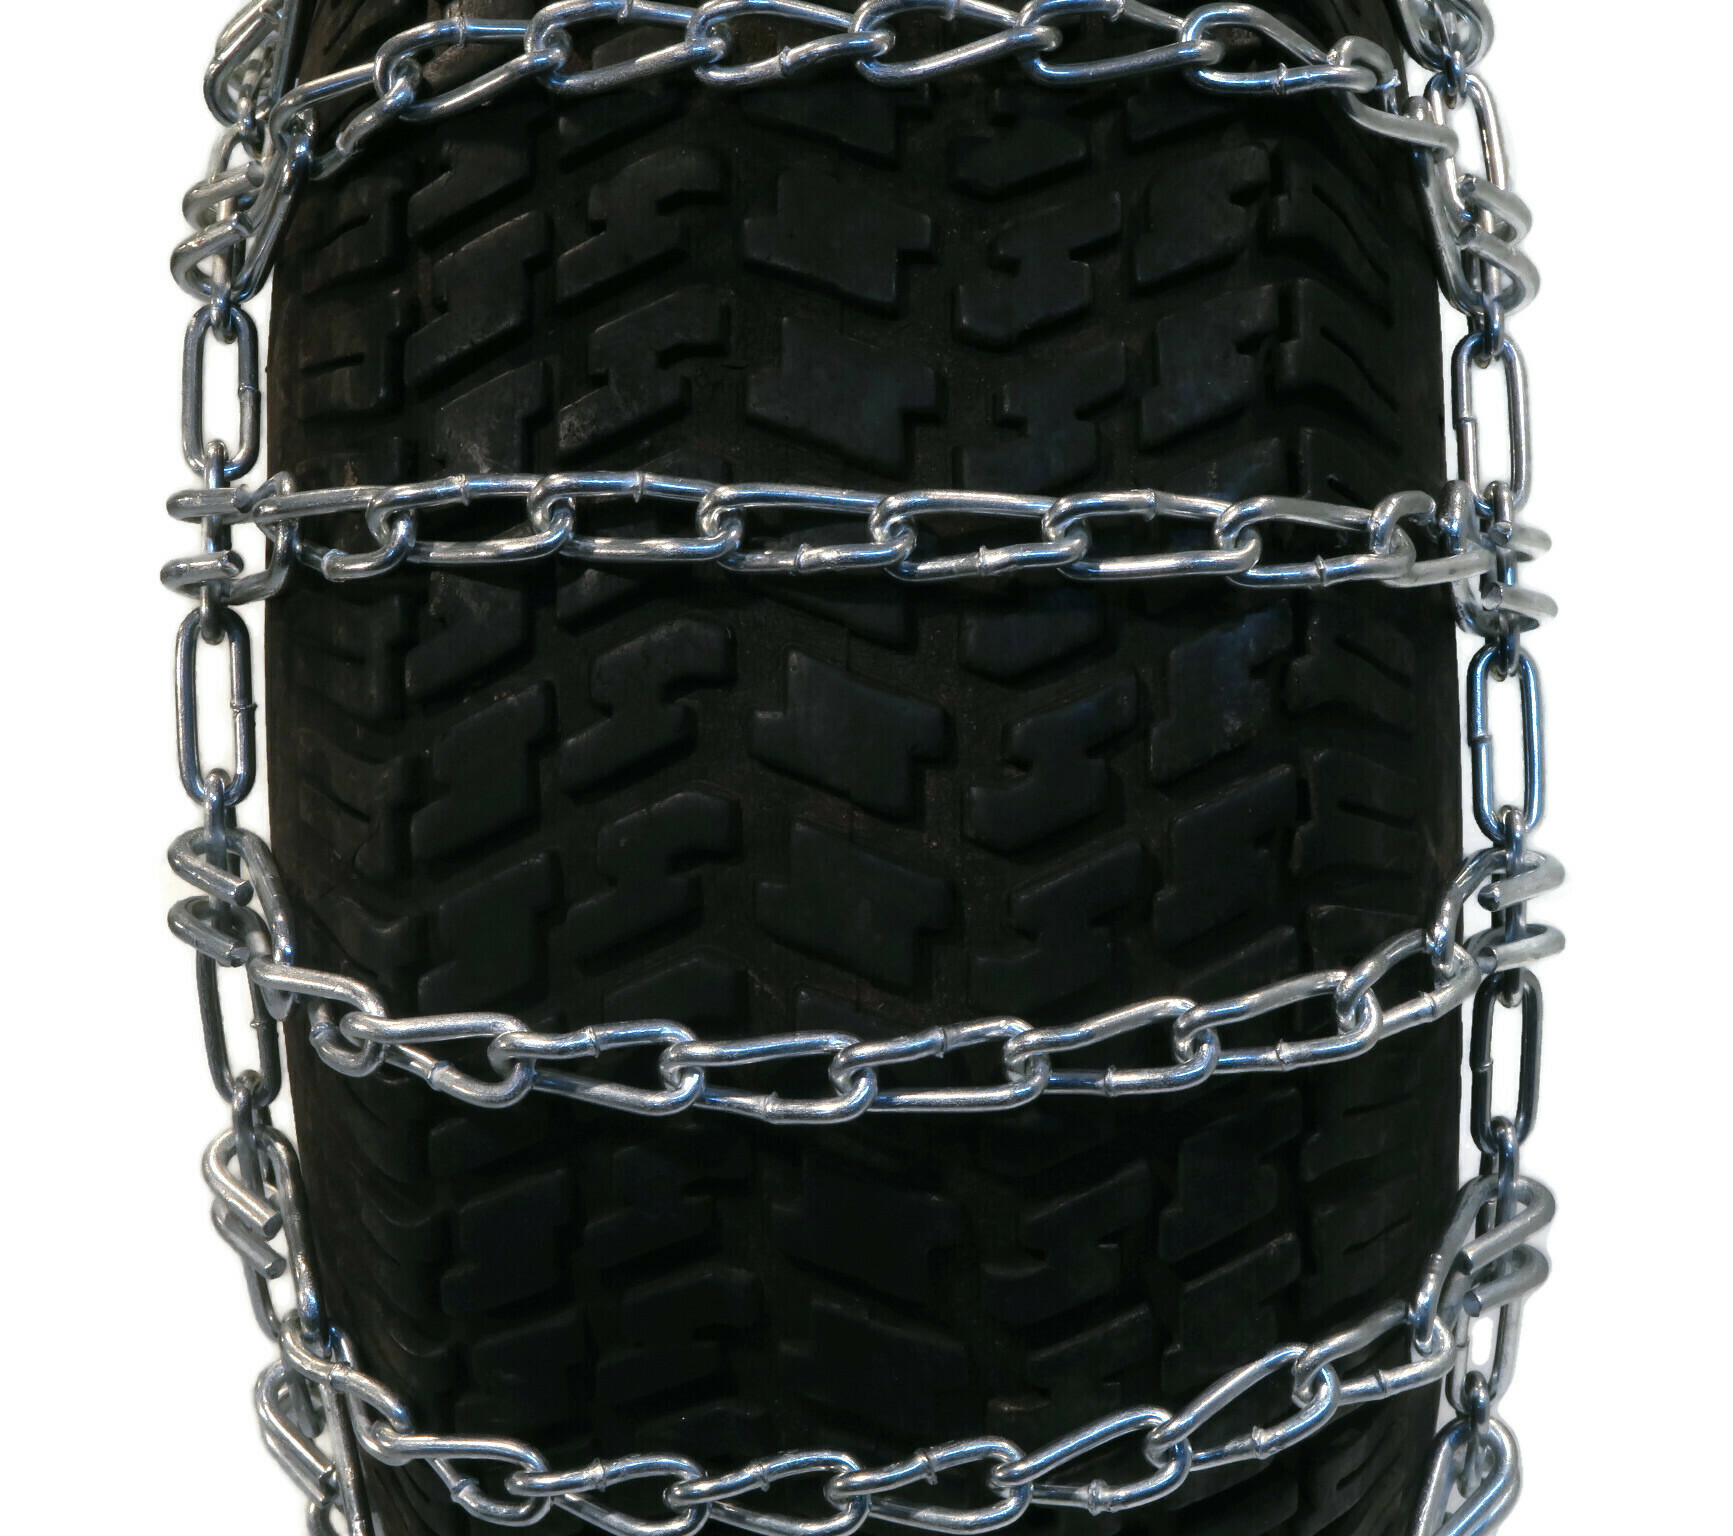 The ROP Shop | Pair 4 Link Tire Chains 29x12x15 for Sears Craftsman Lawn Mower Tractor Rider - image 5 of 6